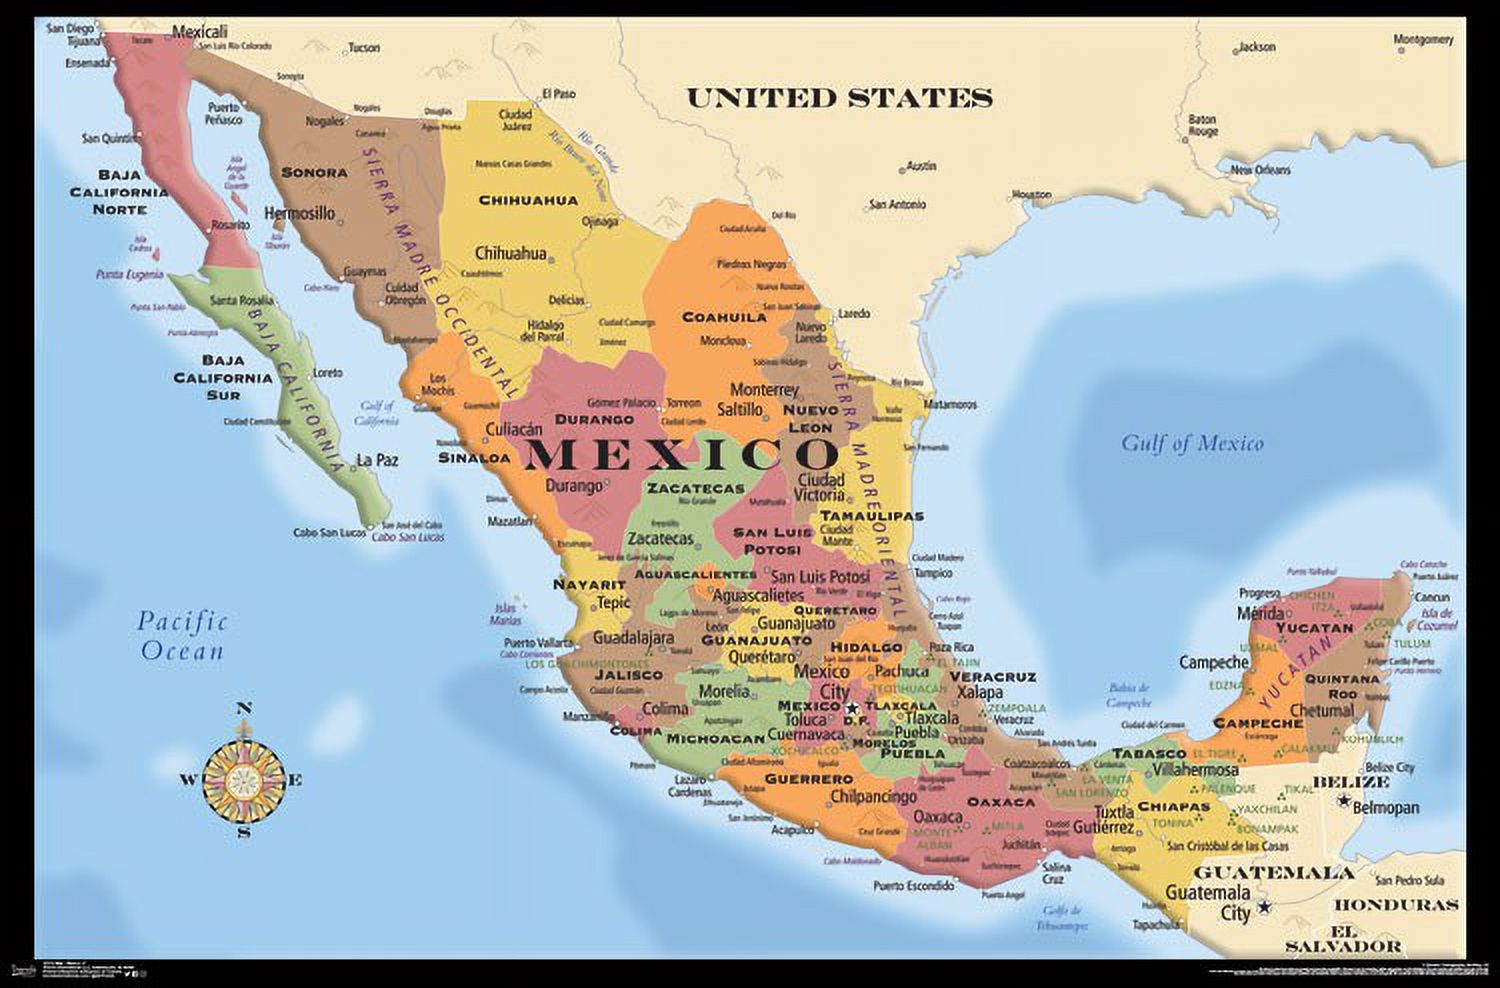 Map - Mexico Poster Print (34 x 22) - image 1 of 1